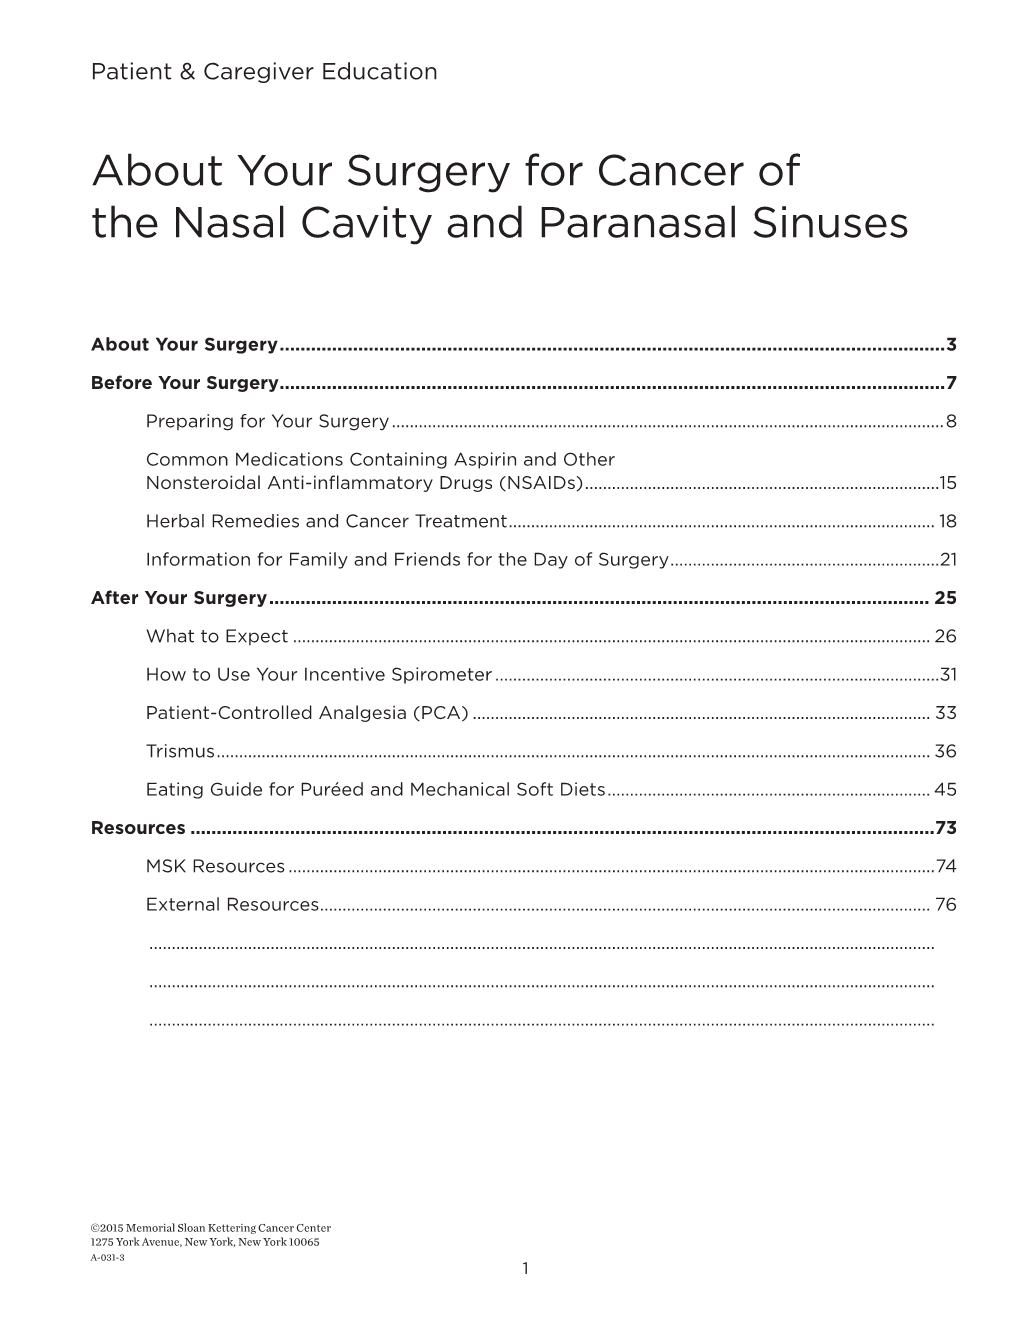 About Your Surgery for Cancer of the Nasal Cavity and Paranasal Sinuses